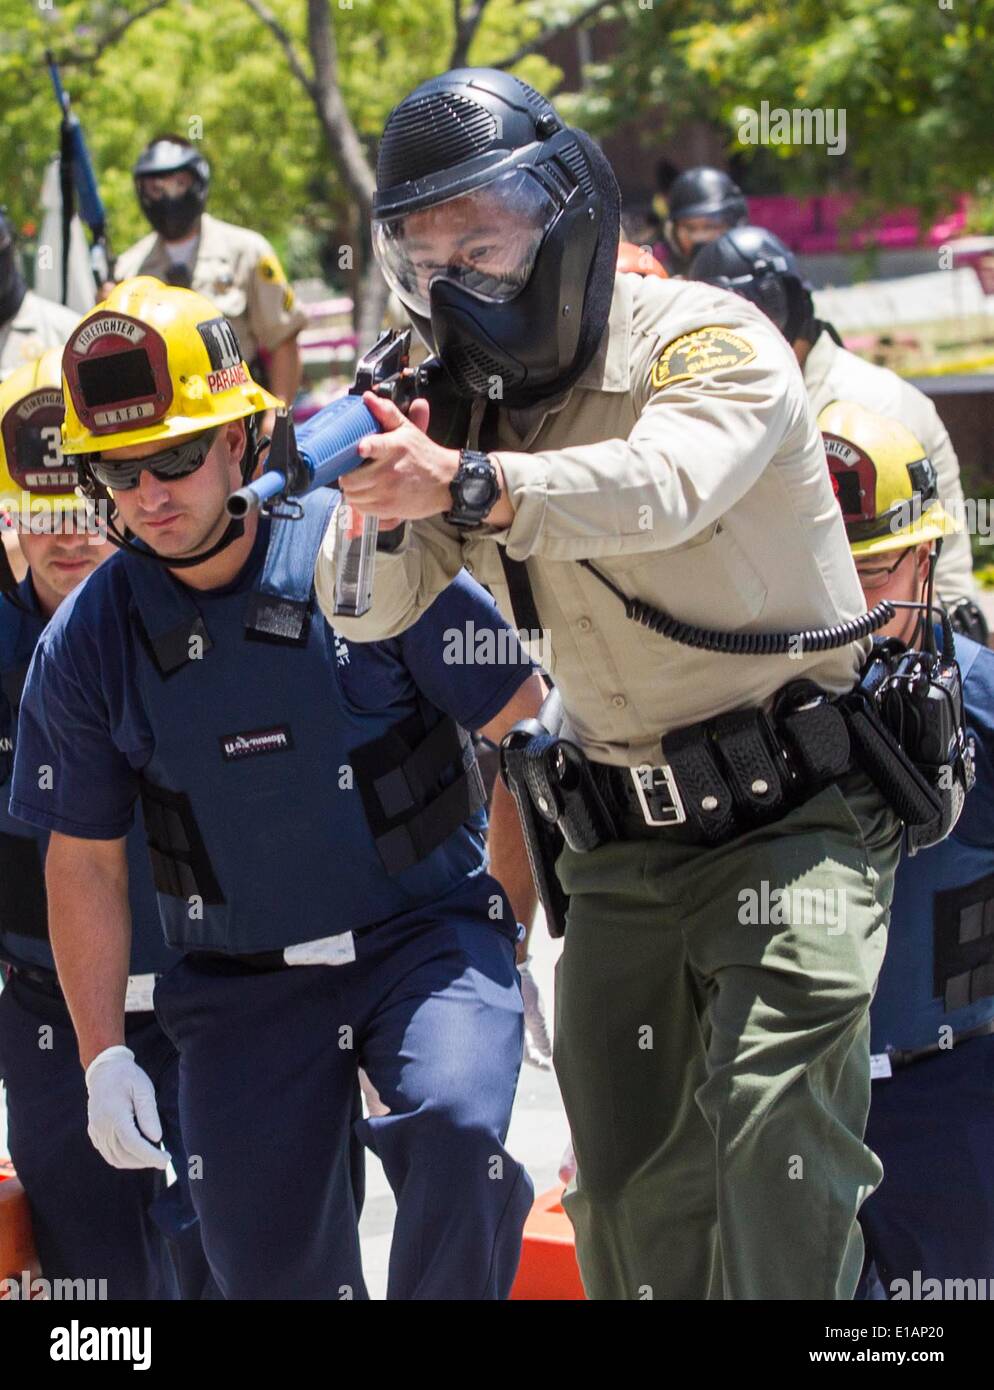 Los Angeles, USA. 28th May, 2014. Members of Special Enforcement Bureau cover the rescue team entering Los Angeles County Hall of Administration during a training exercise involving a simulated shooting in downtown Los Angeles, the United States, on May 28, 2014. The Los Angeles County Sheriff's Department held a large-scale training exercise involving a simulated shooting taking place at a Board of Supervisors meeting here Wednesday. Credit:  Zhao Hanrong/Xinhua/Alamy Live News Stock Photo